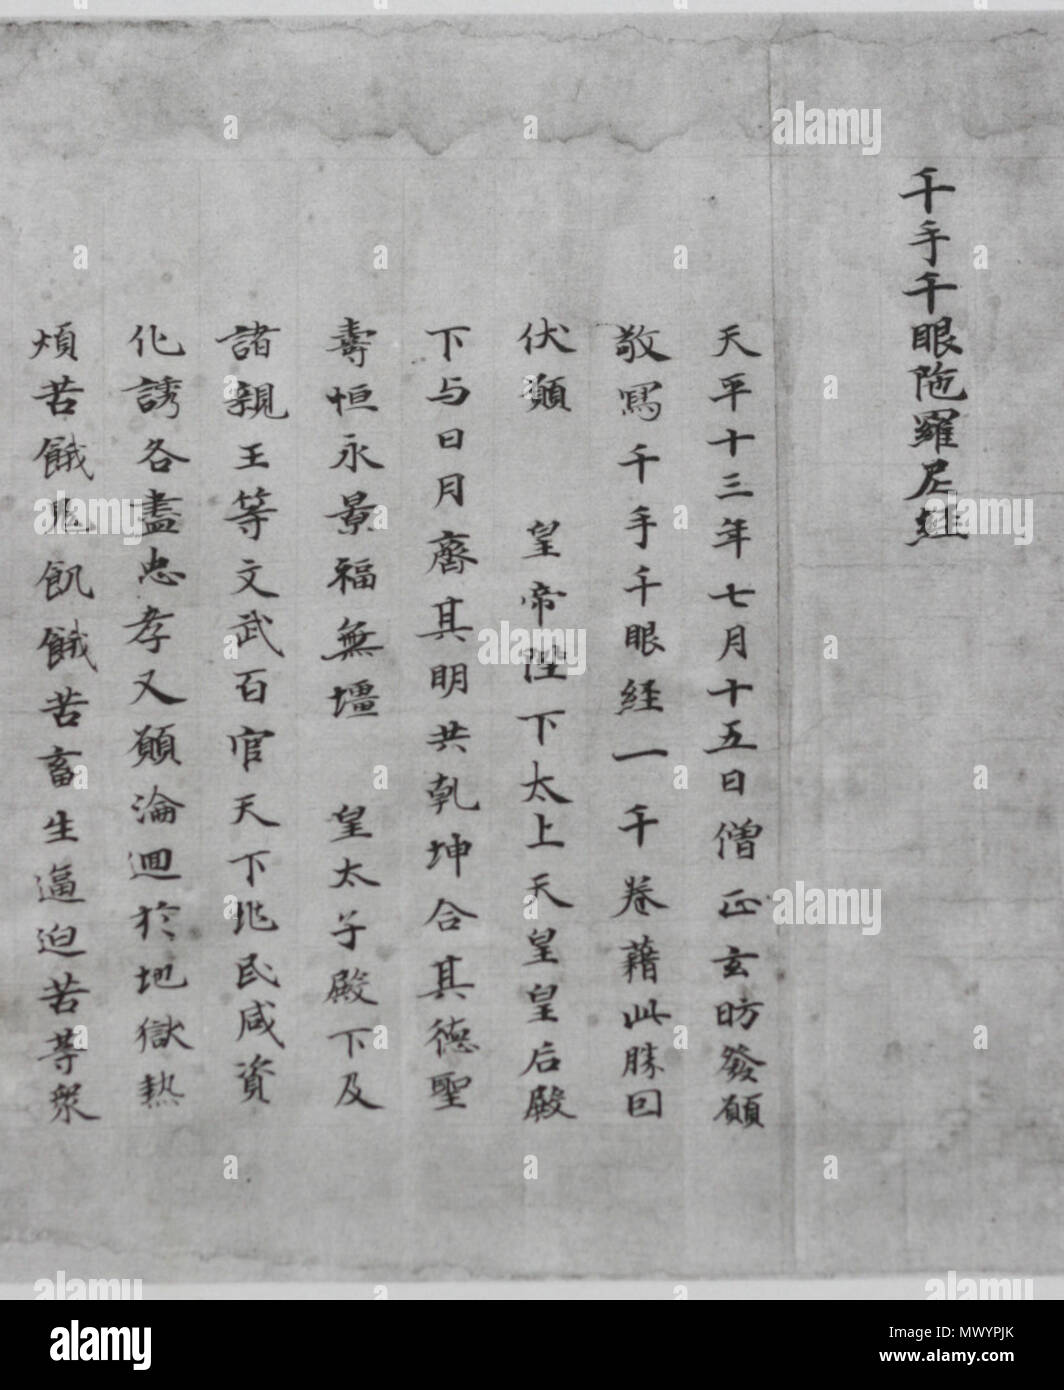 . English: Last part. ACE741, Total scroll is a segment of the Senju sengen daranikyo Sutra, ACE741 Only extant portion of one thousand copies of the Senju sengen daranikyo made under sponsorship of bishop Genbo. Mentioned in the Essential Records of Todai-ji. 109lines, opening part is lost. Kyoto National Museum, Kyoto, Japan 日本語: 千手千眼陀羅尼経、残巻、旧守屋孝蔵コレクション、京都国立博物館 . ACE741. Unknown 552 Senjyu Sengan Daranhi Kyohaku Stock Photo